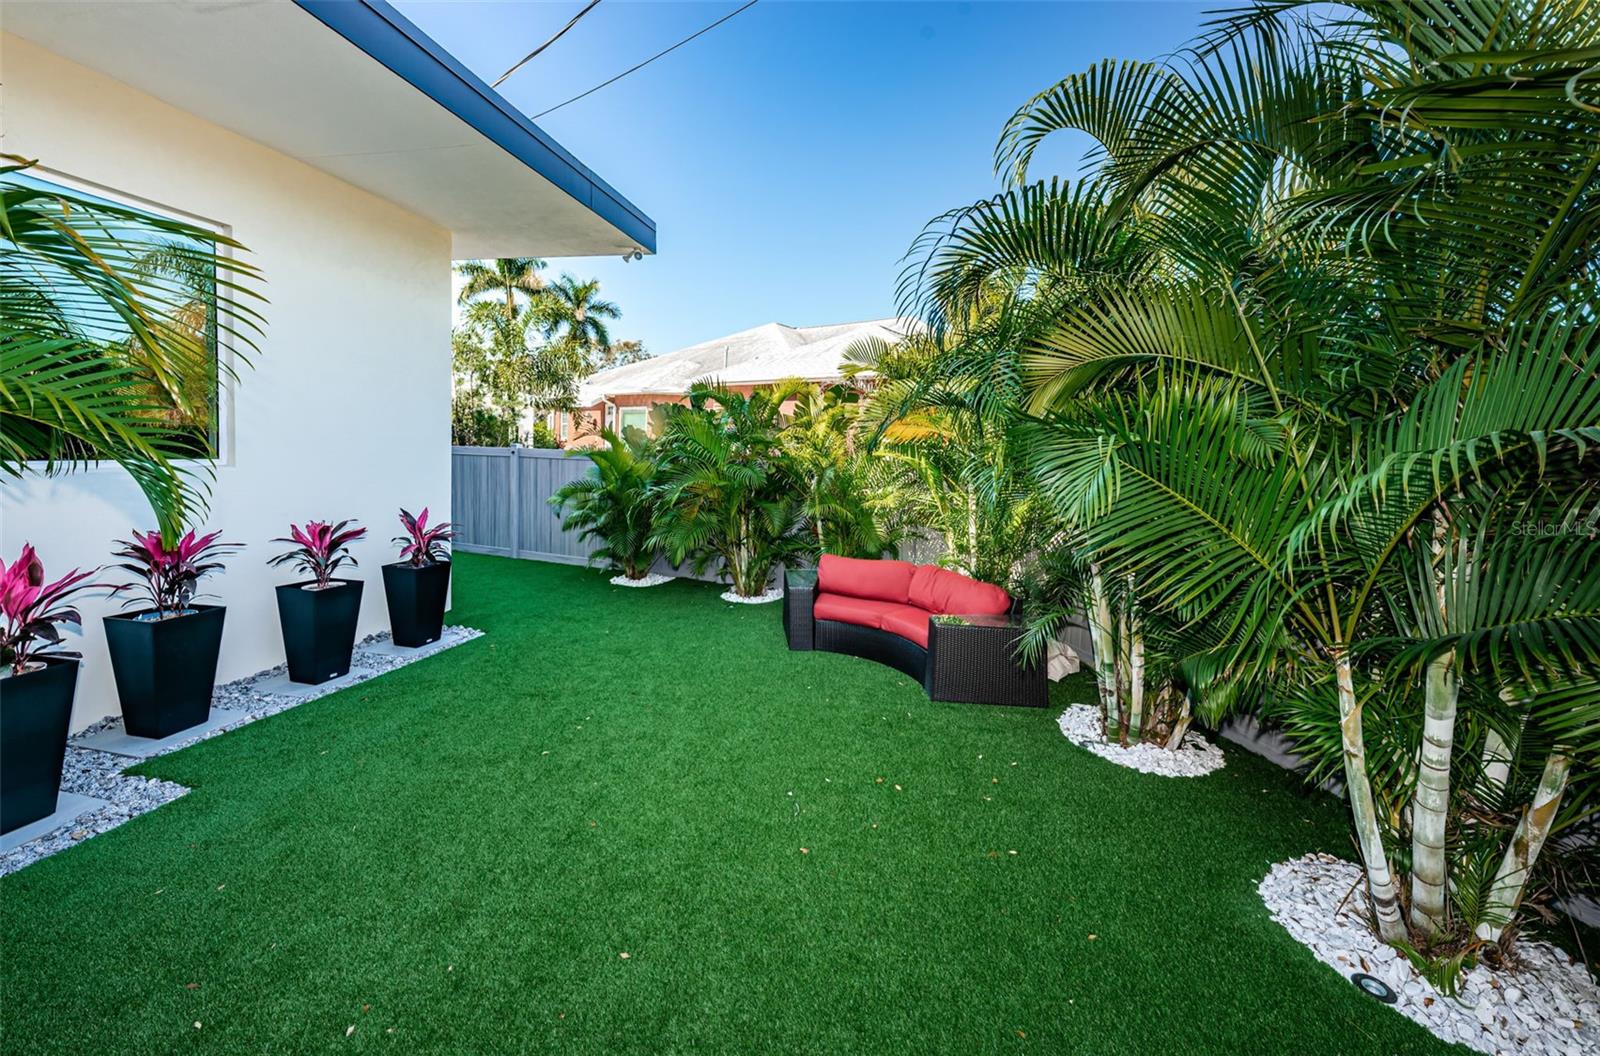 Awesome artificial turf covers part of this gorgeous backyard complete with lots of lush landscaping.